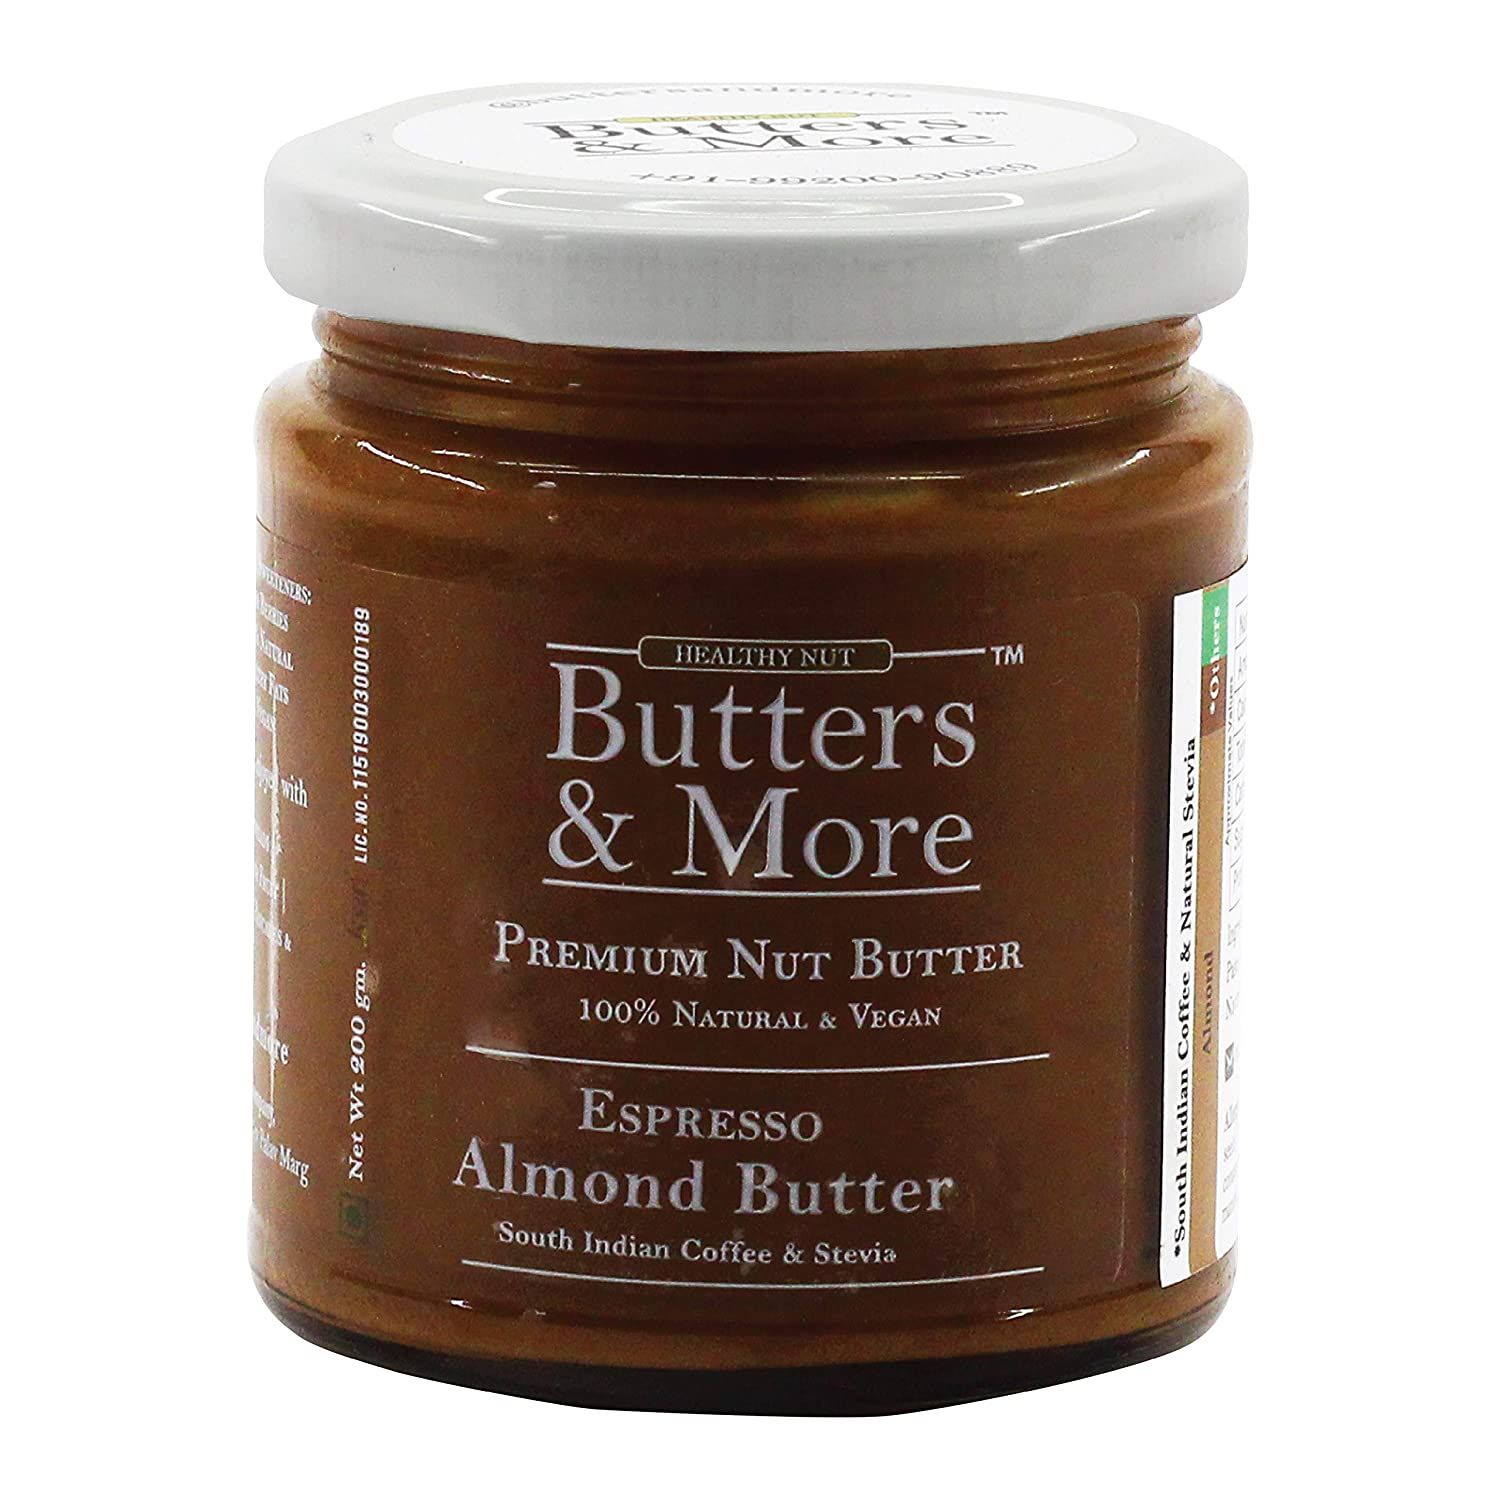 Butters & More Keto Espresso Almond Butter With South Indian Coffee & Natural Stevia Extract Image